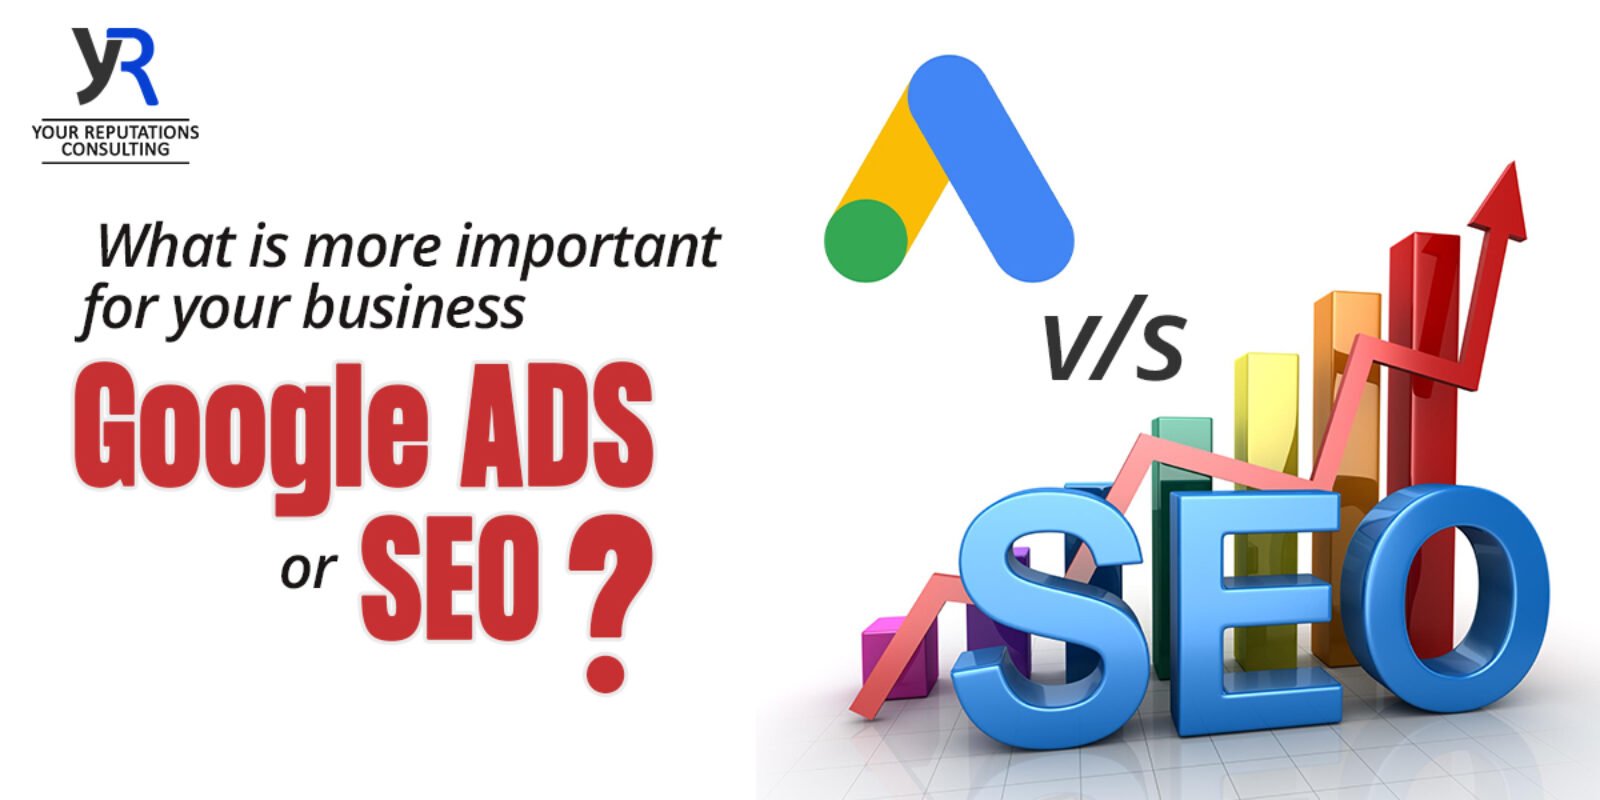 What is more important for your business Google ADS or SEO?